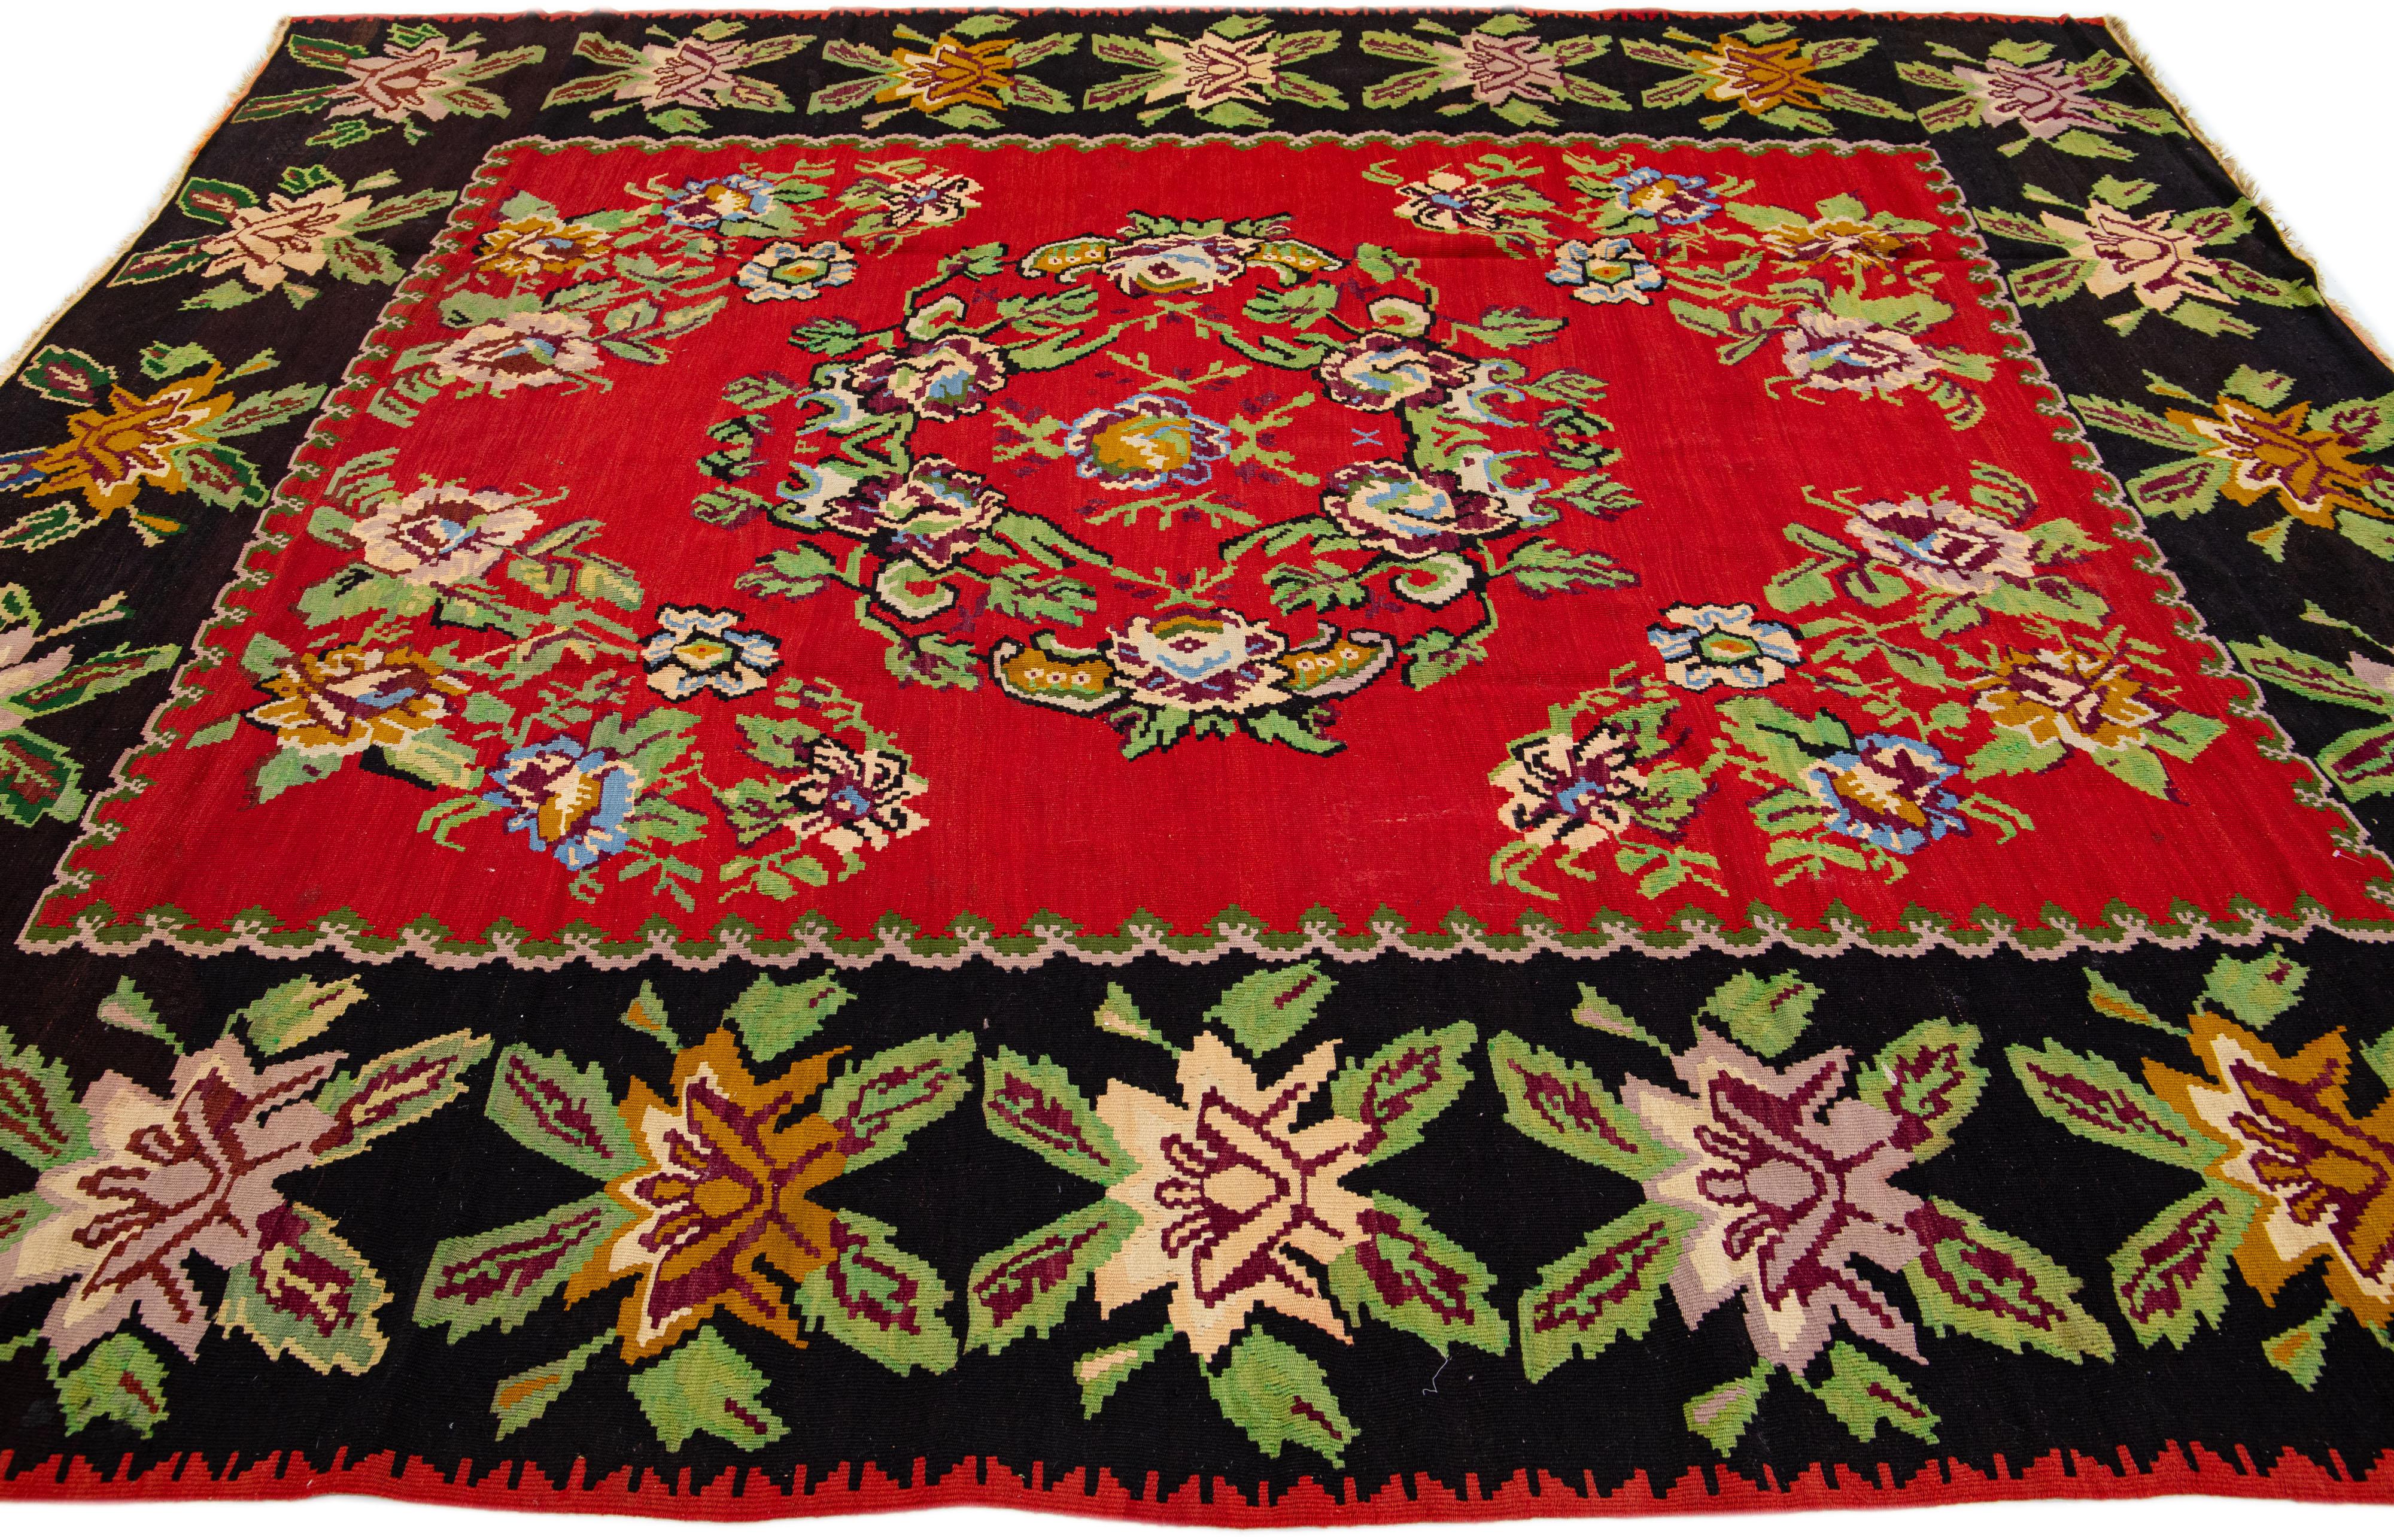 Hand-Knotted Vintage Red Bessarabian Style Kilim Wool Rug with Allover Floral Motif For Sale